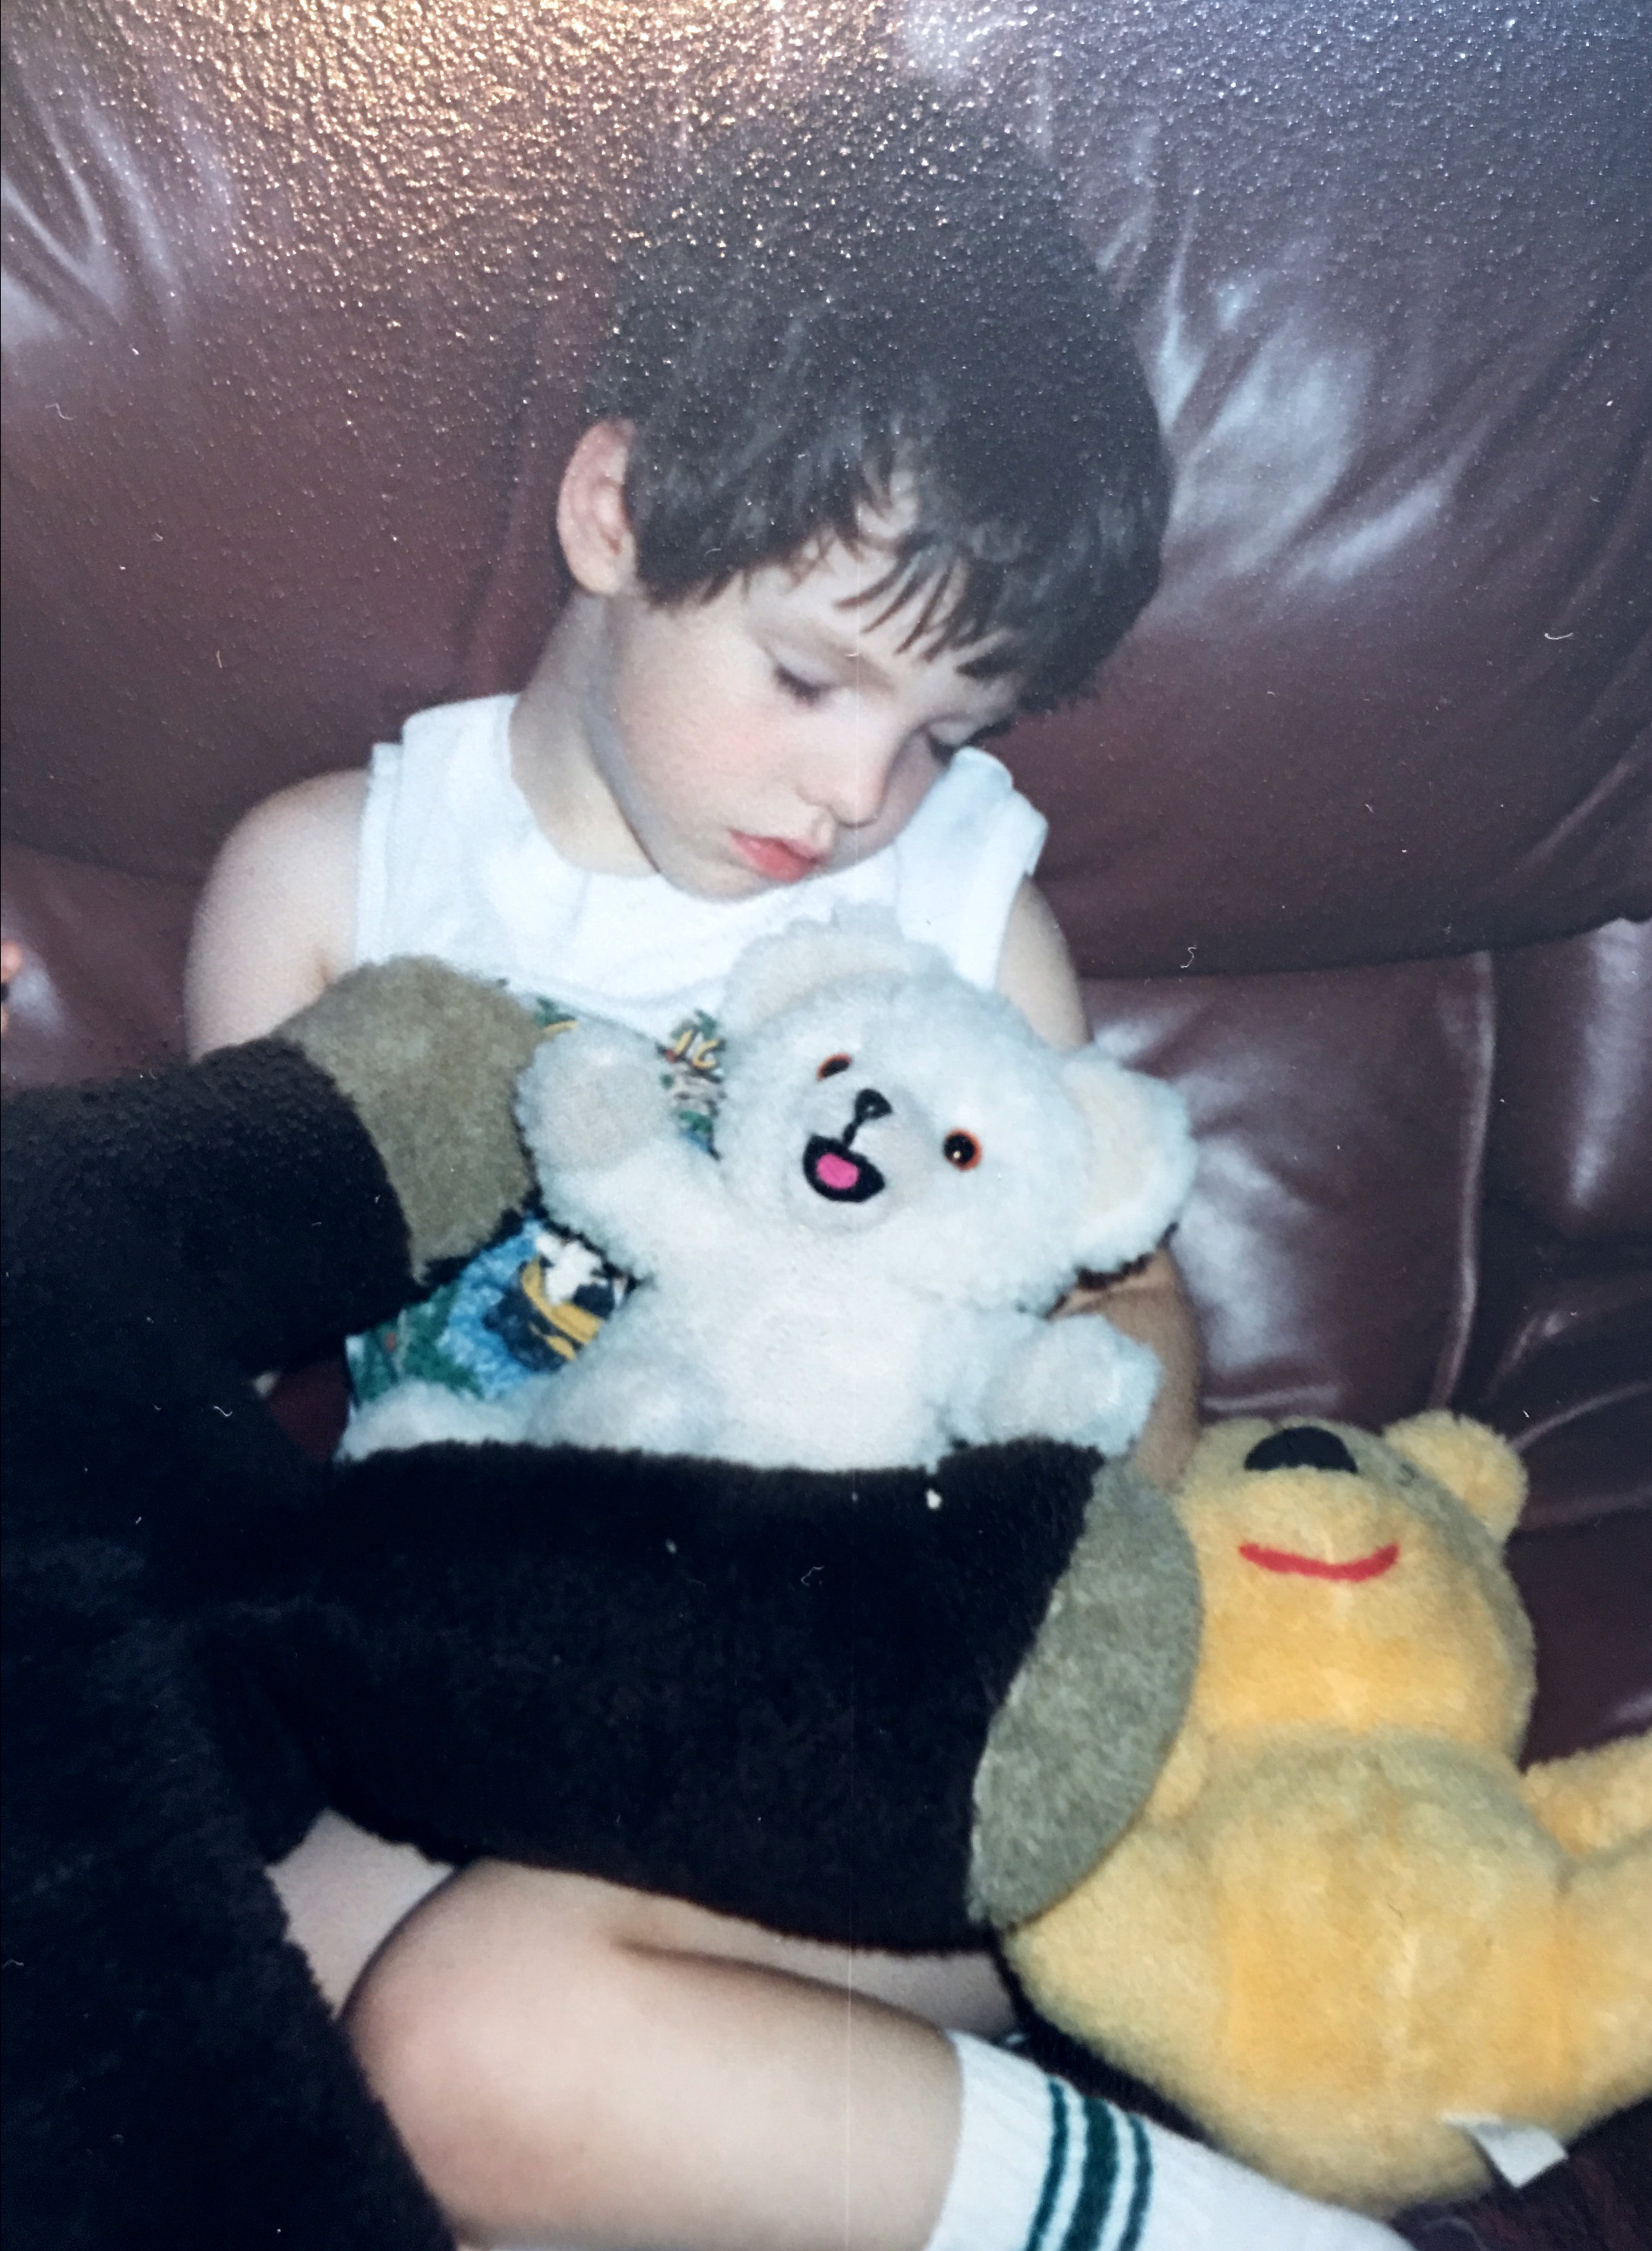 Little David at 5 yrs old ~ eating popcorn and falling asleep. (Around 1987 or 1988)
